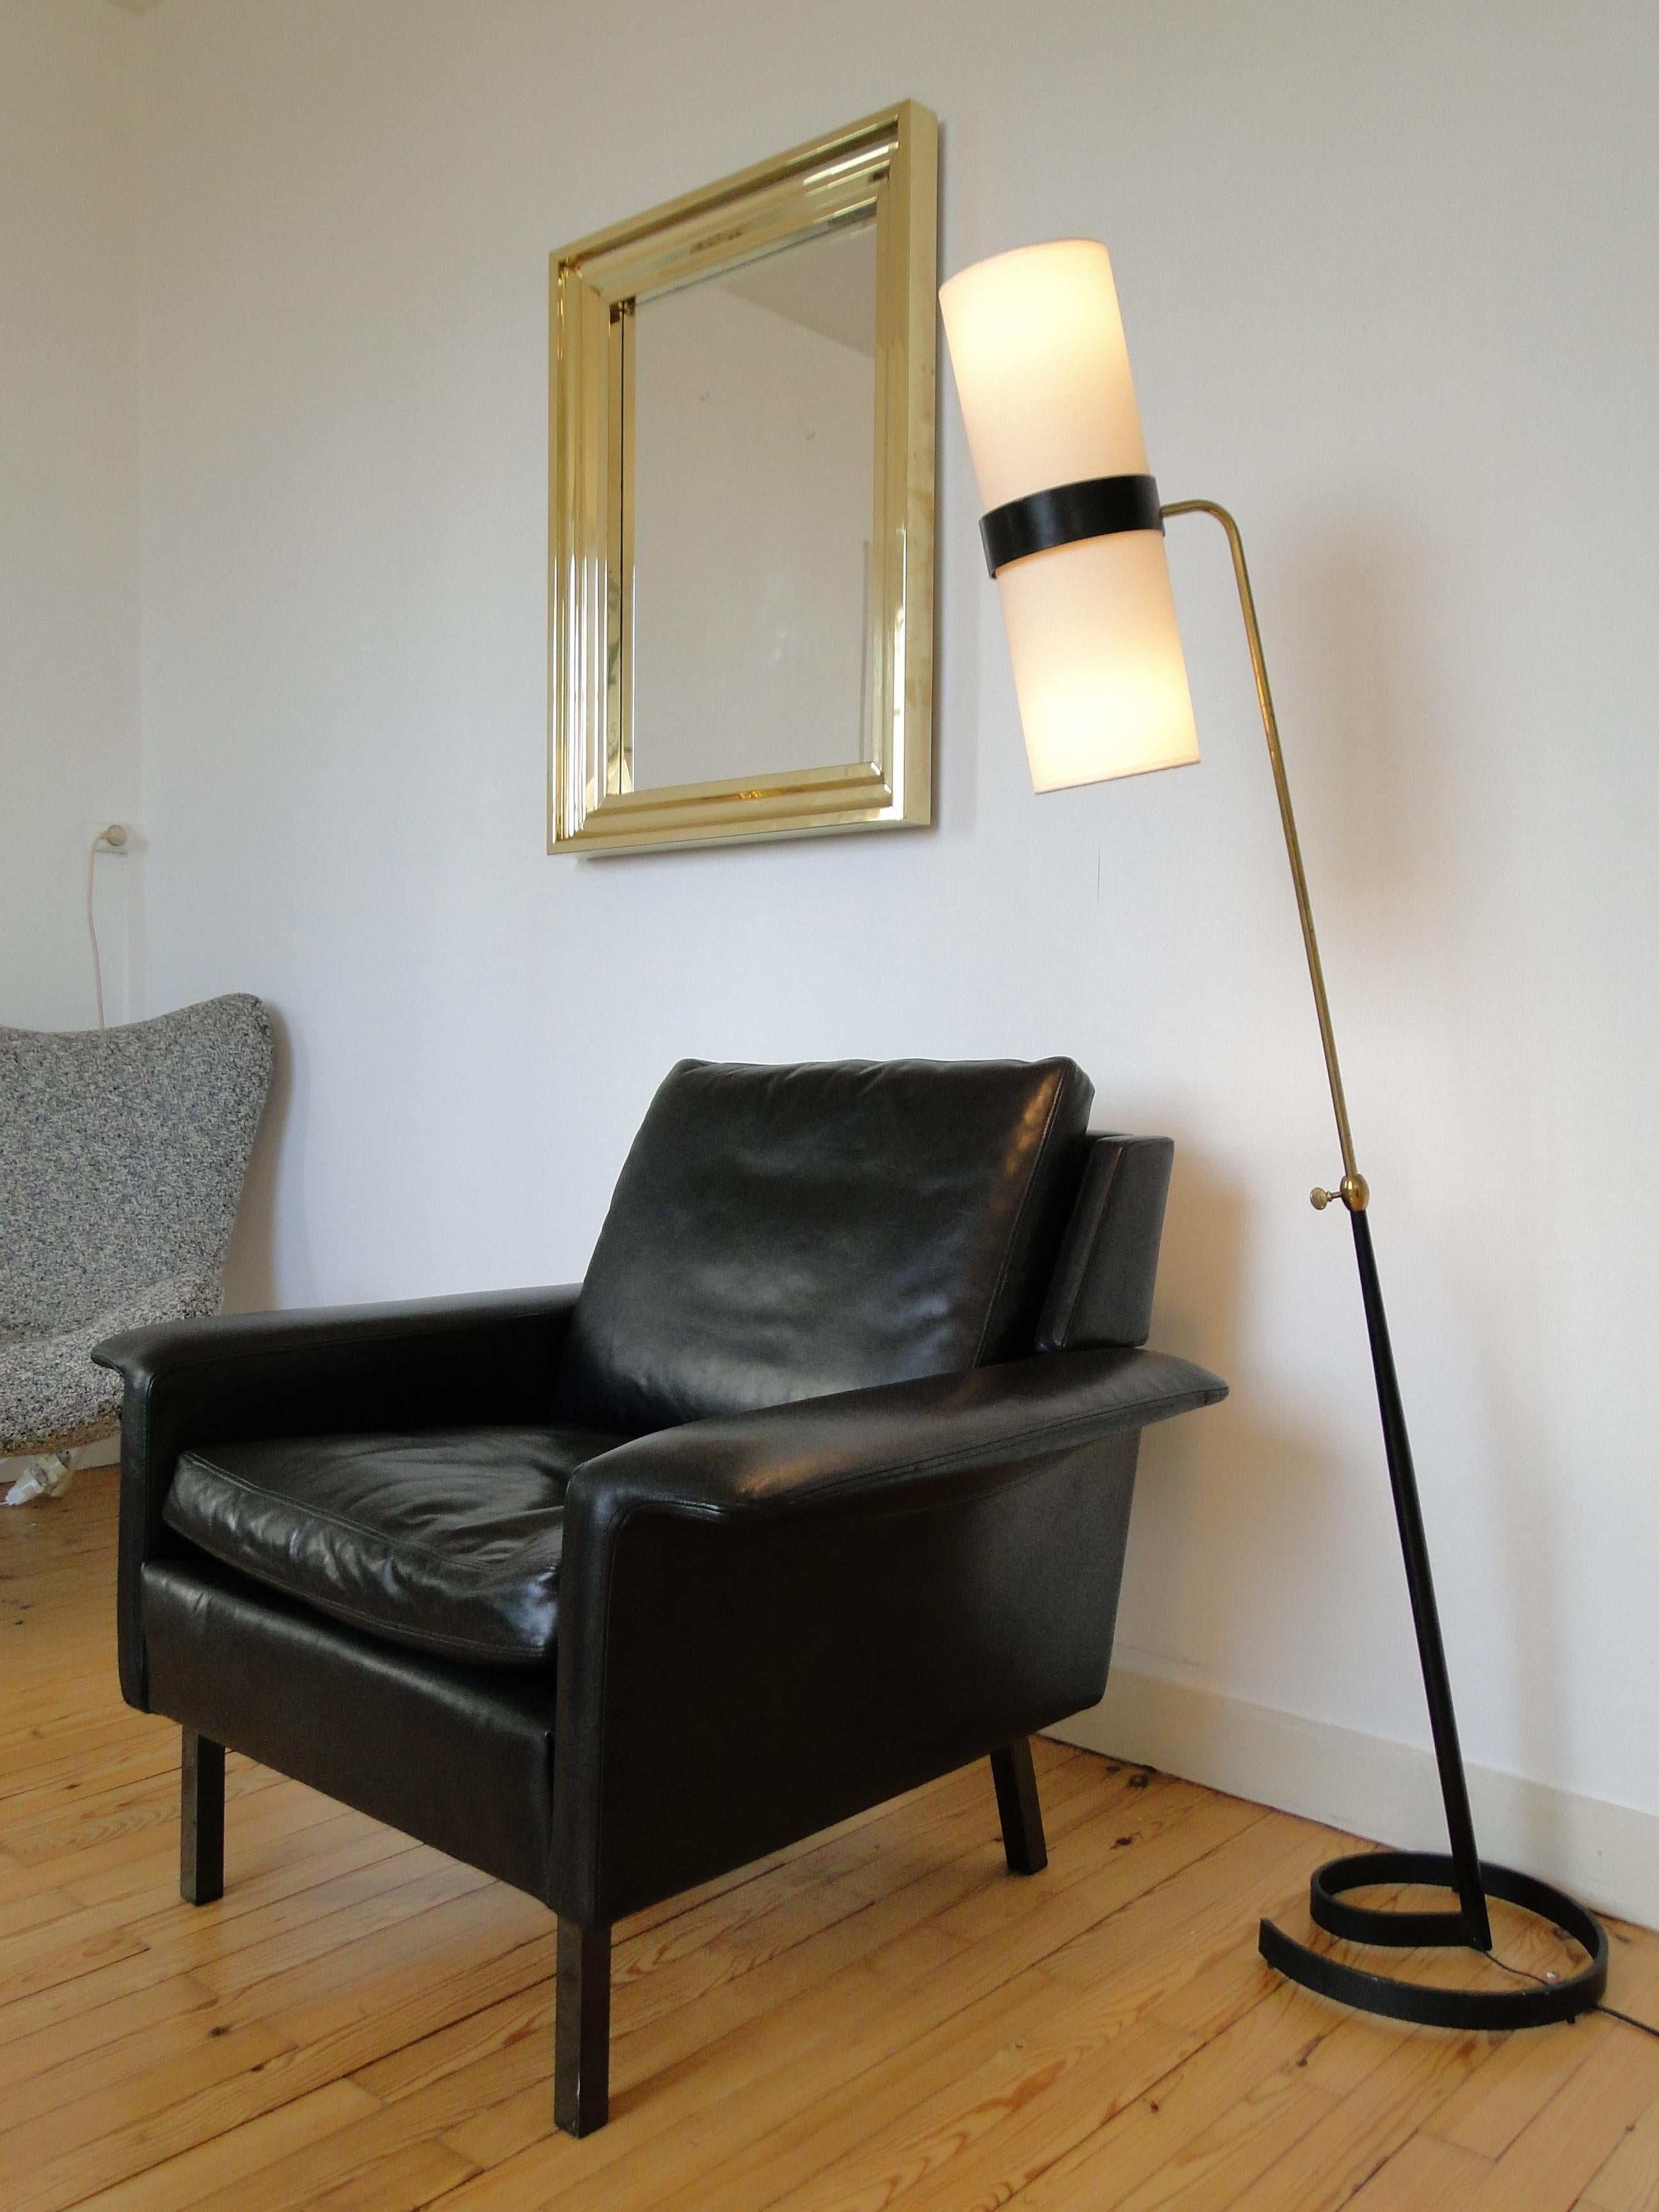 Magnificent black armchair from the 1960s. Model 3330.

Made by Fritz Hansen for Arne Vodder.

Completely refurbished with high quality full grain leather.

Metal feet.

Very elegant and comfortable.